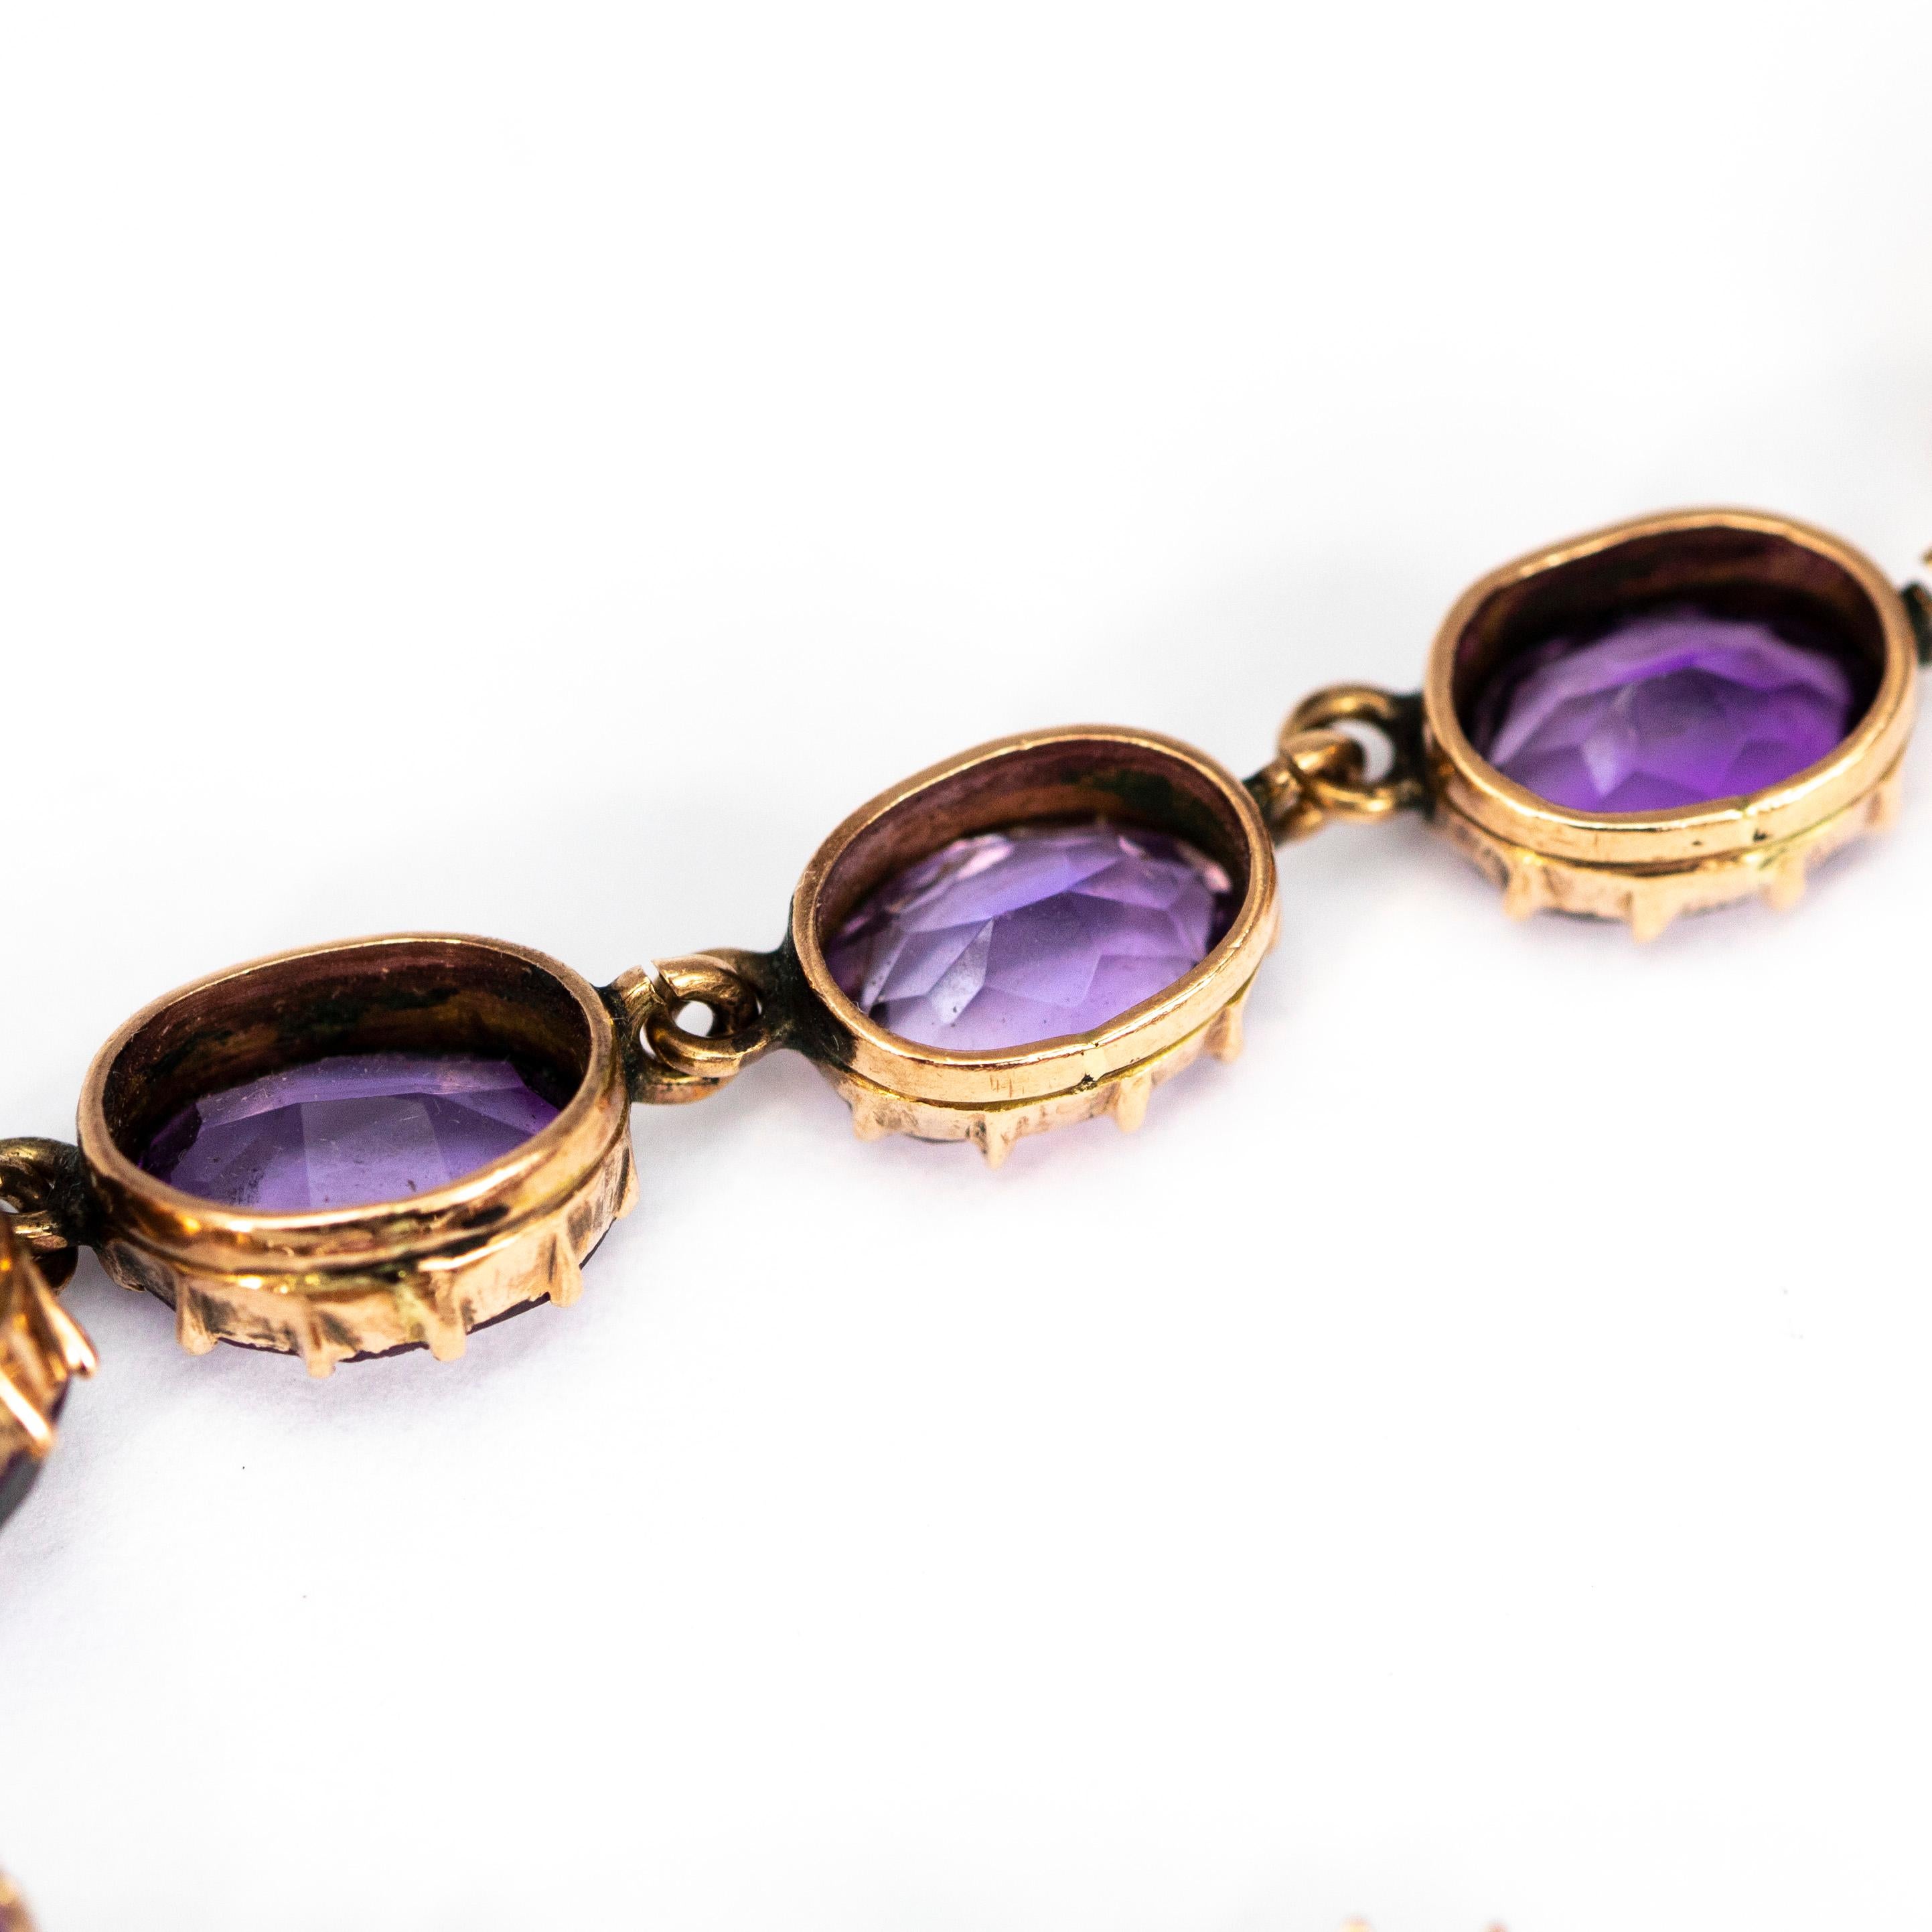 Women's Victorian Amethyst and Gold Riviere